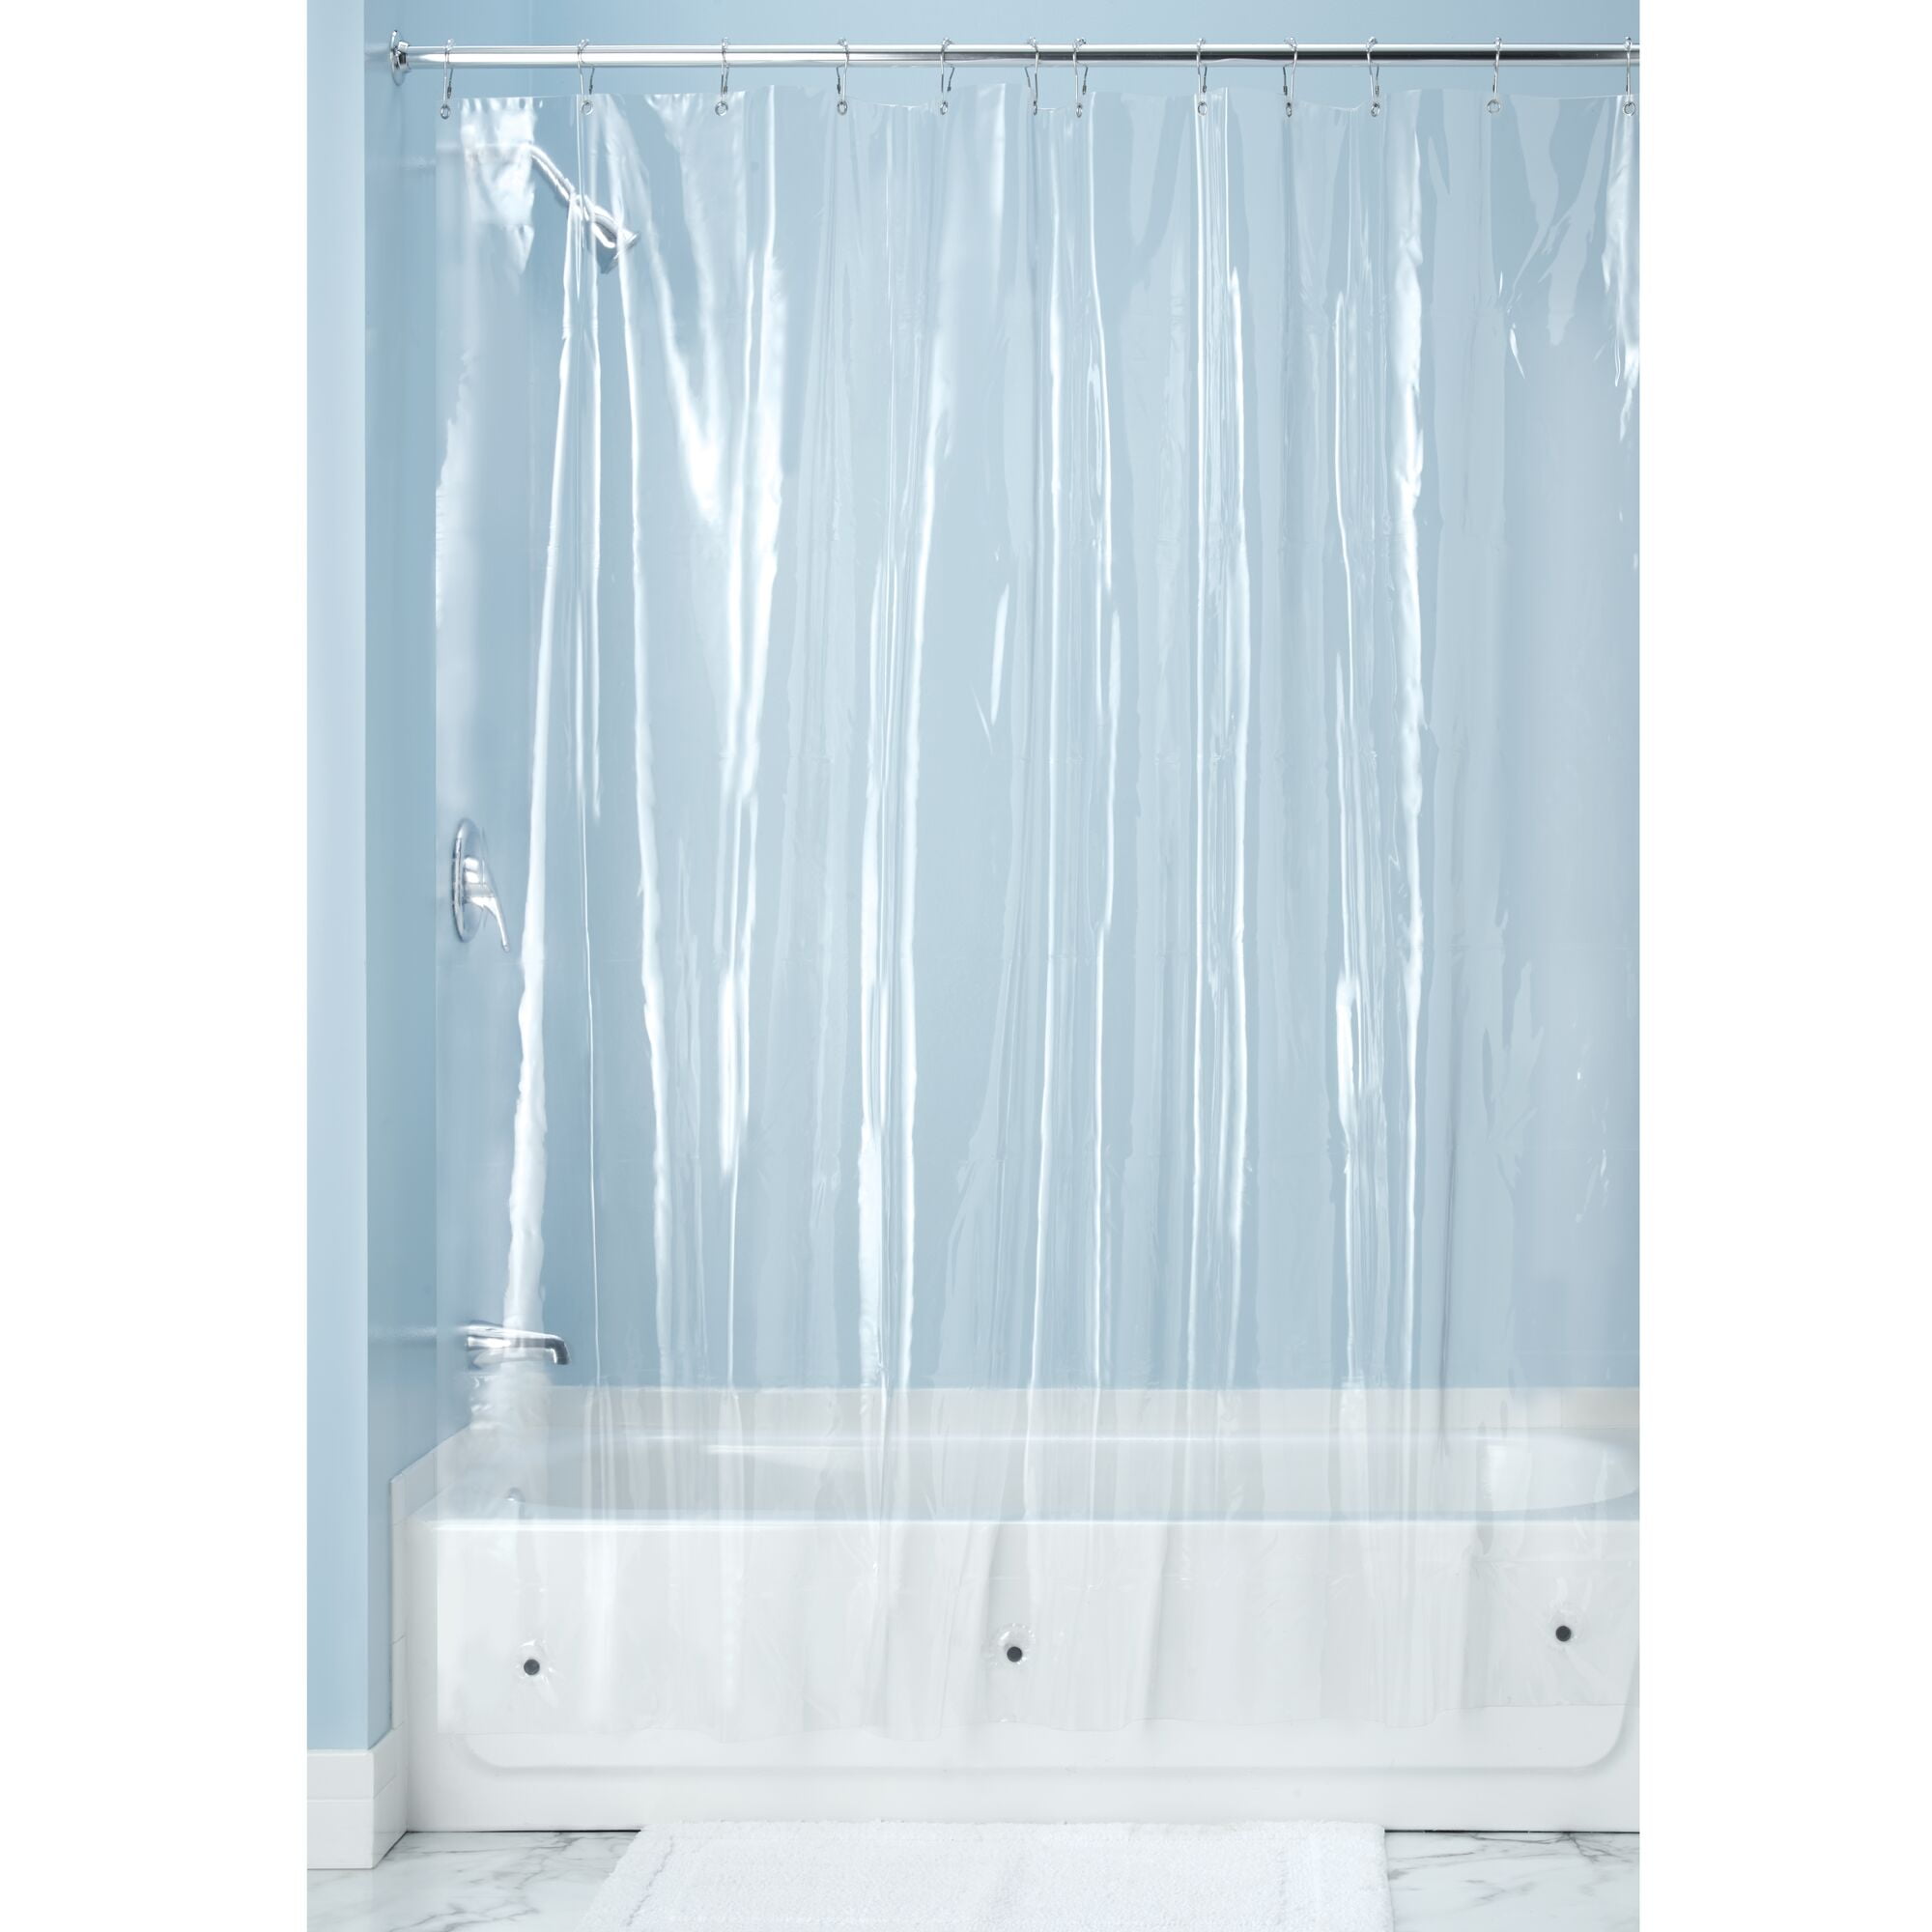 Picture of B & K 4580106 72 x 96 in. Interdesign Vinyl Clear Solid Shower Curtain Liner